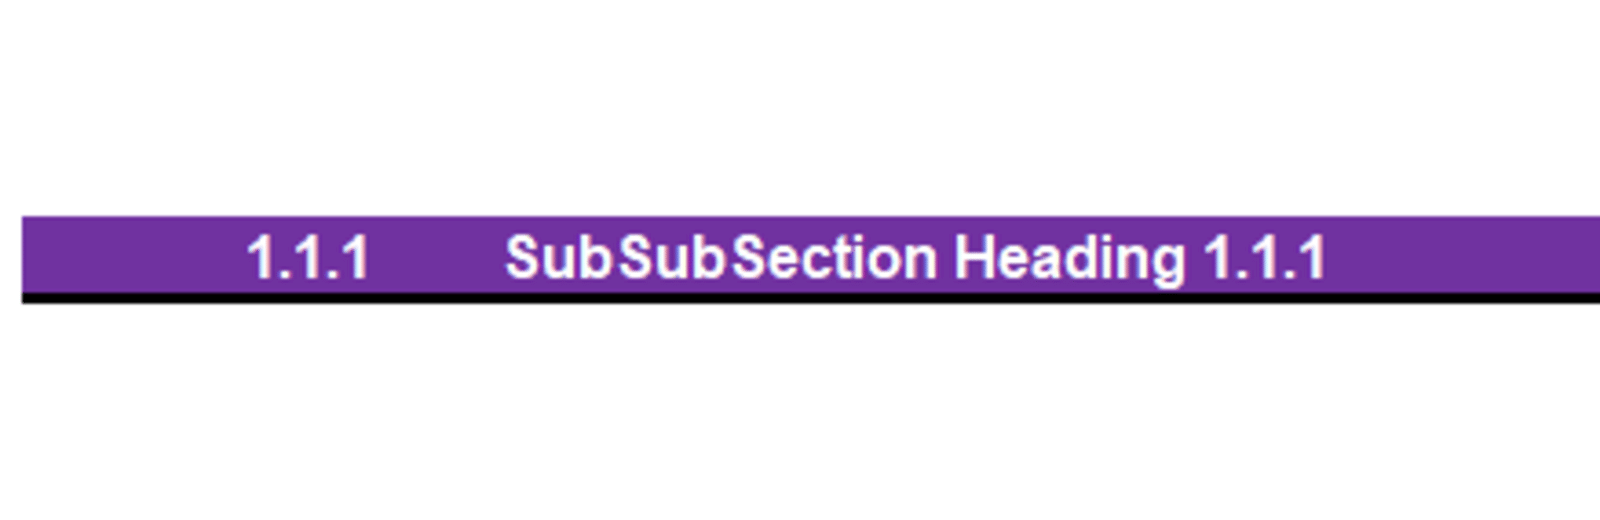 Subsubsection header example